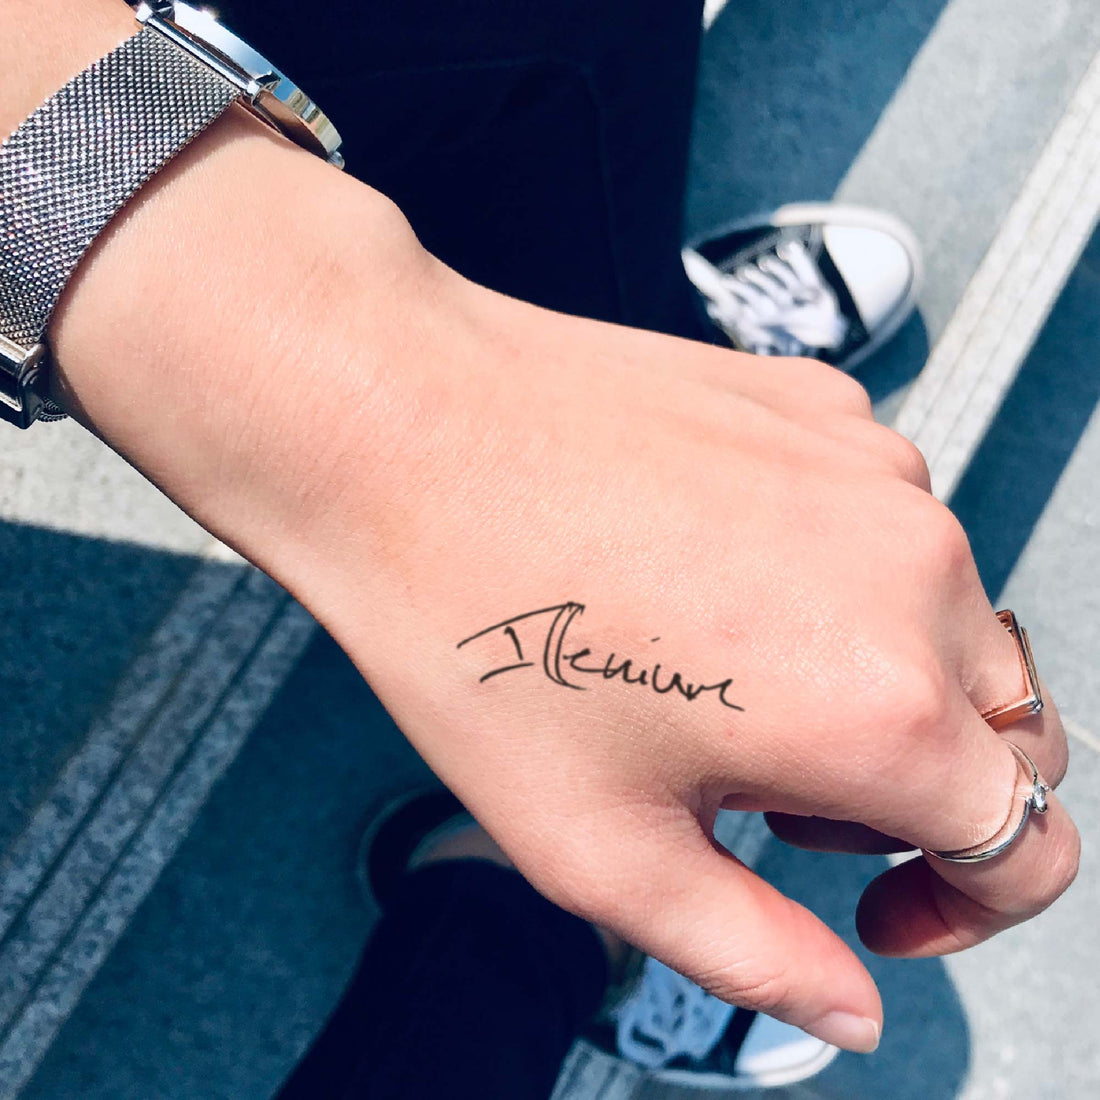 Illenium custom temporary tattoo sticker design idea inspiration meanings removal arm wrist hand words font name signature calligraphy lyrics tour concert outfits merch accessory gift souvenir costumes wear dress up code